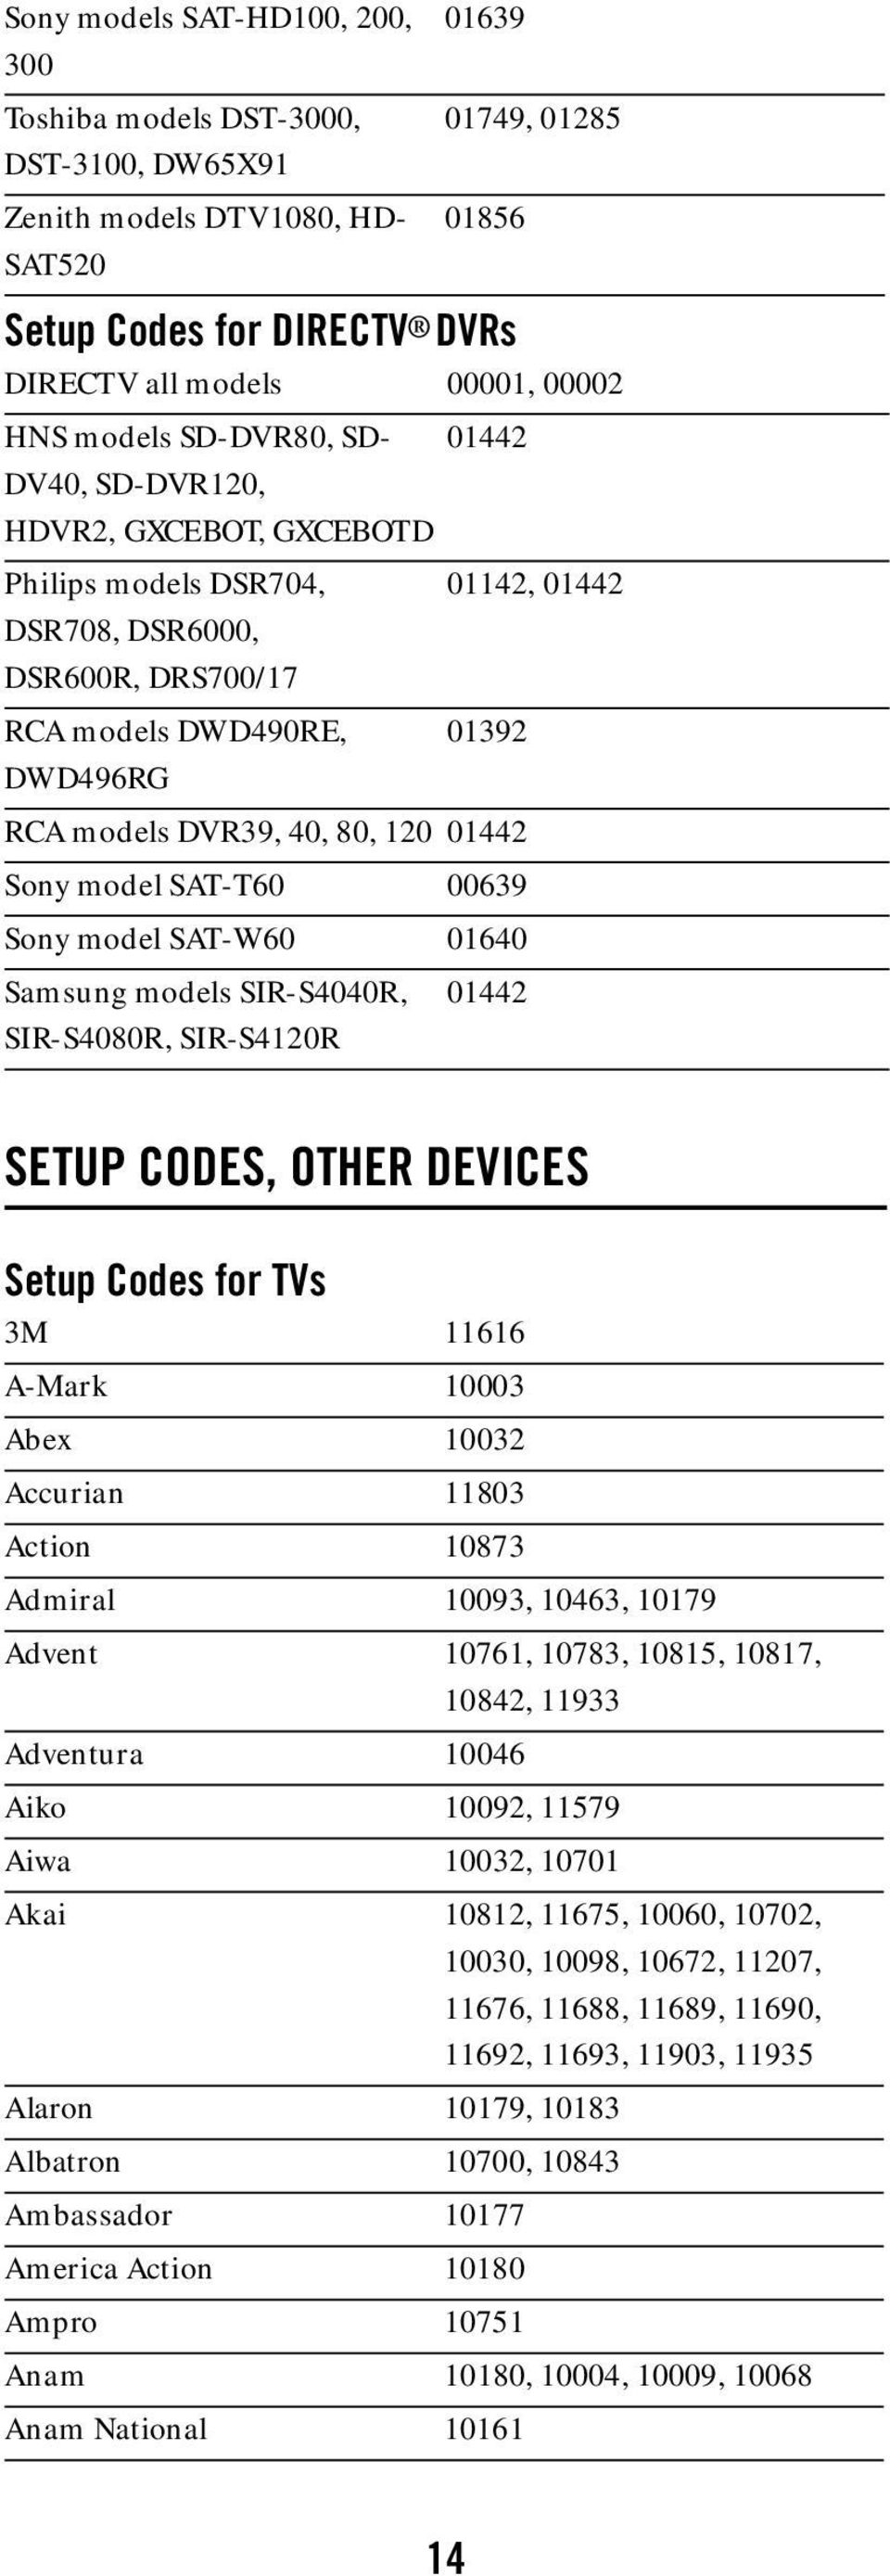 80, 120 01442 Sony model SAT-T60 00639 Sony model SAT-W60 01640 Samsung models SIR-S4040R, 01442 SIR-S4080R, SIR-S4120R SETUP CODES, OTHER DEVICES Setup Codes for TVs 3M 11616 A-Mark 10003 Abex 10032